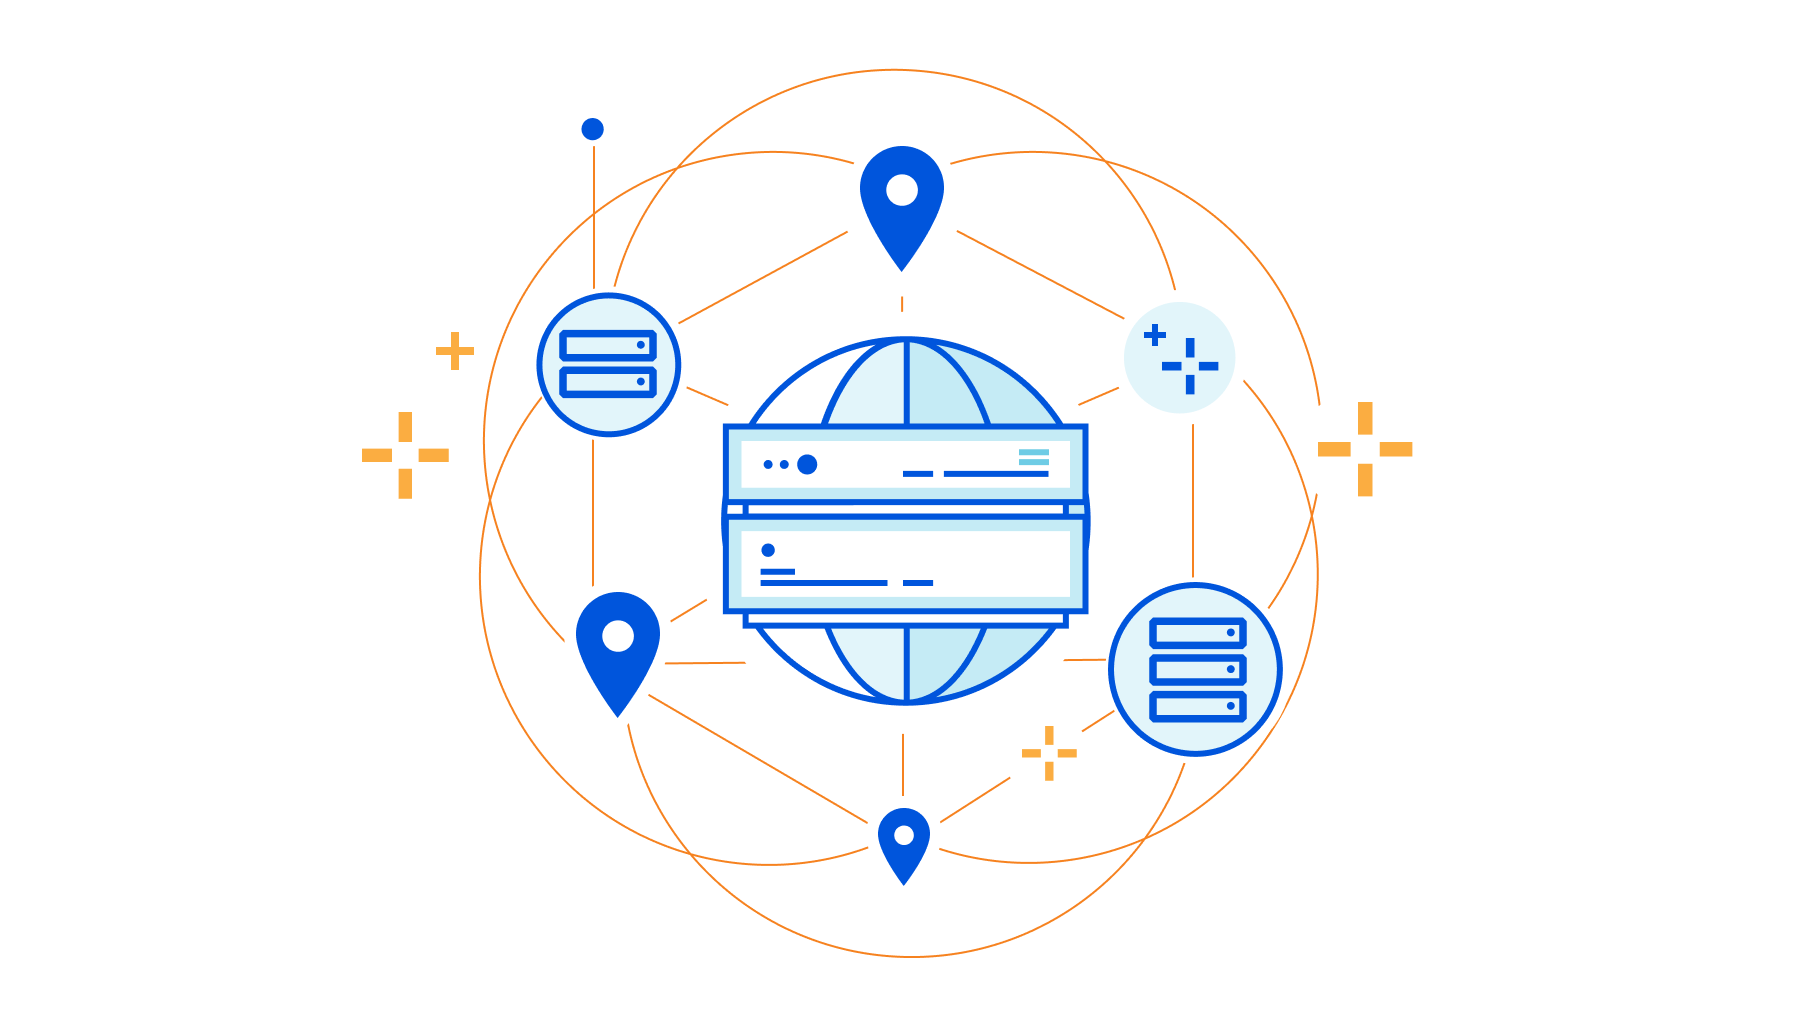 How to connect your offices to Cloudflare using SD-WAN